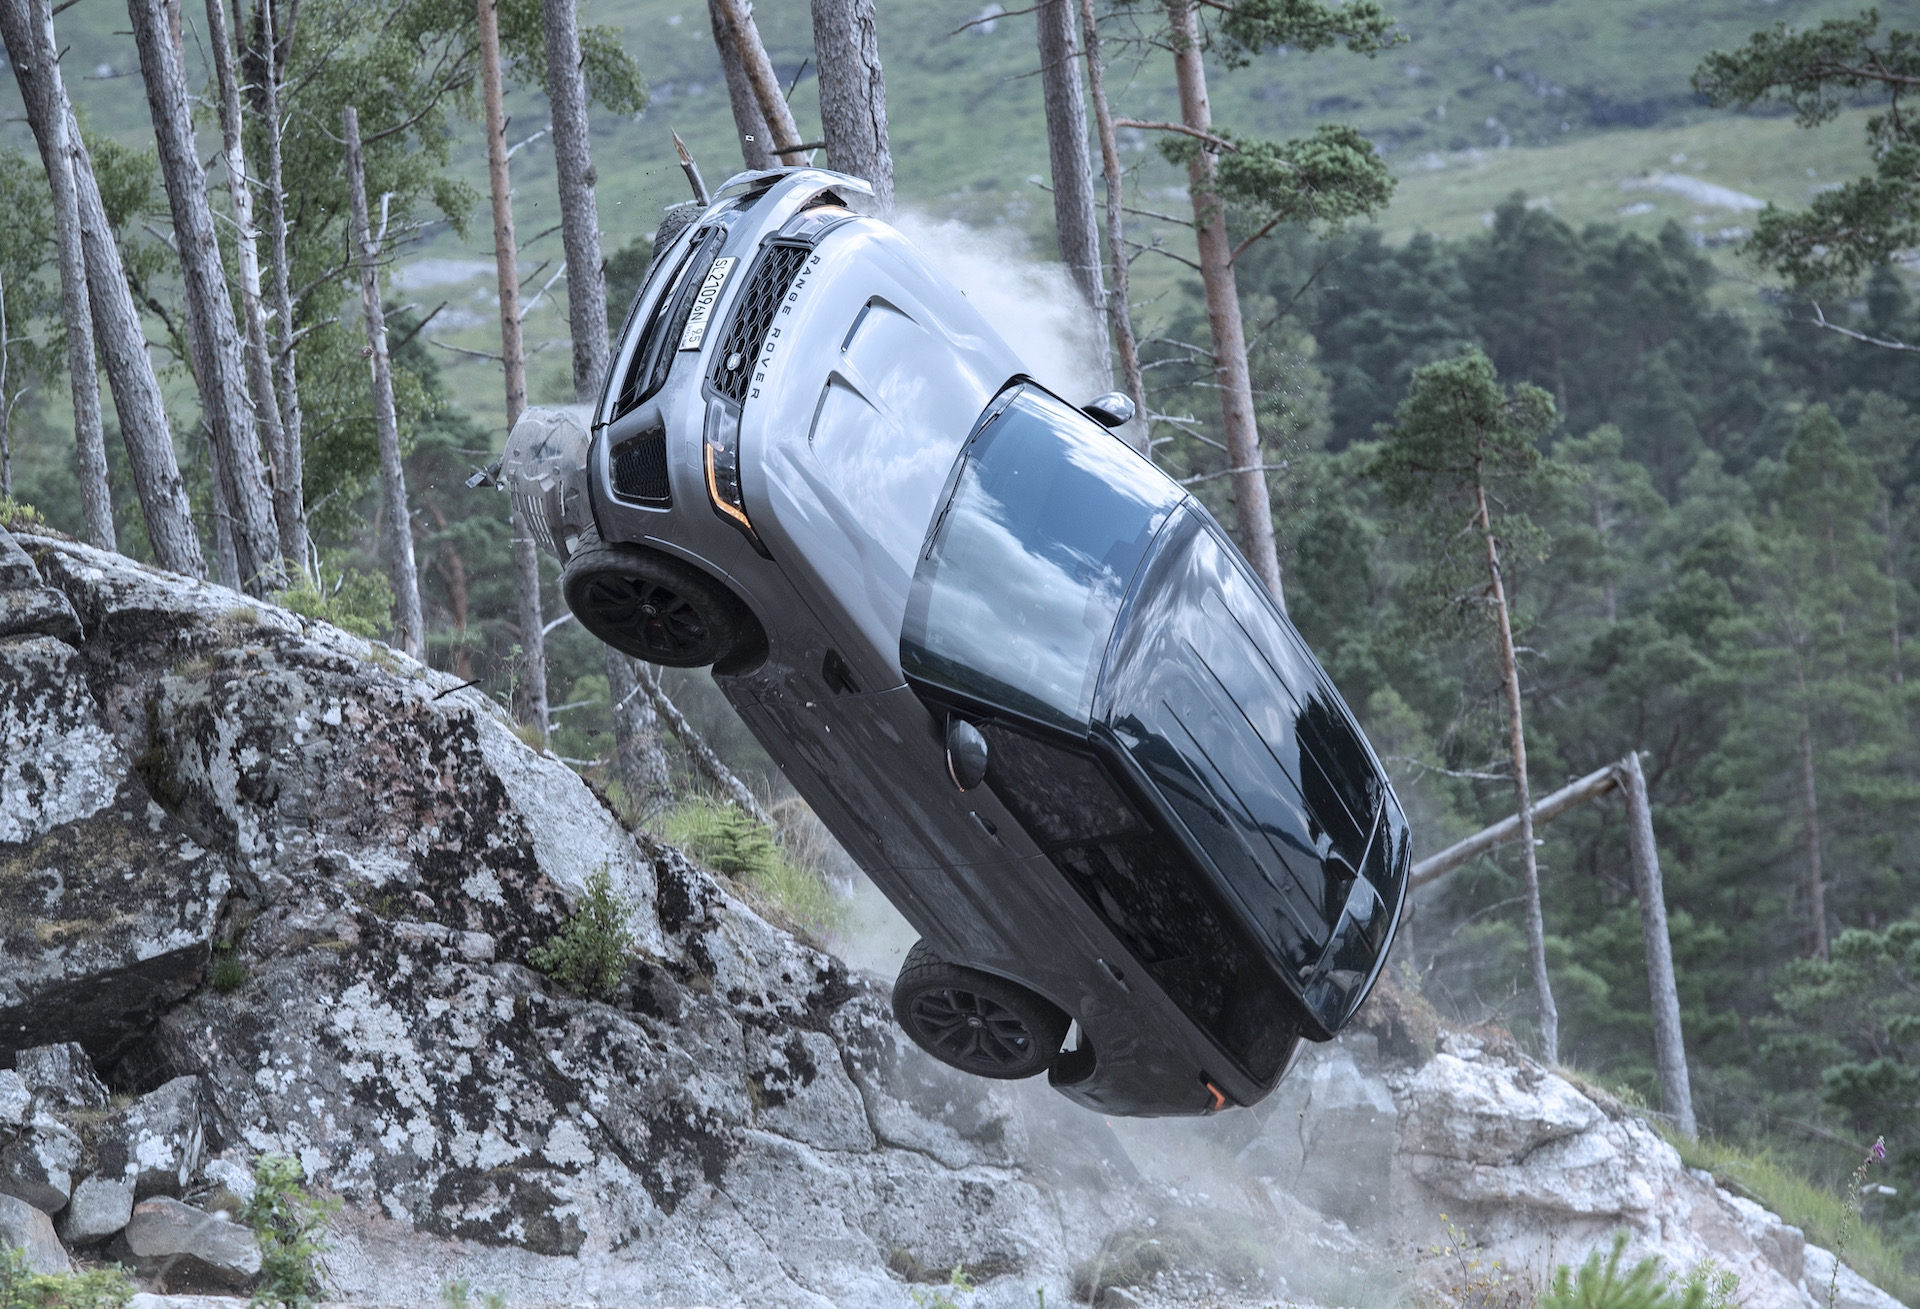 Range Rover Sport SVRs destroyed during ‘No Time to Die’ Bond filming (video)